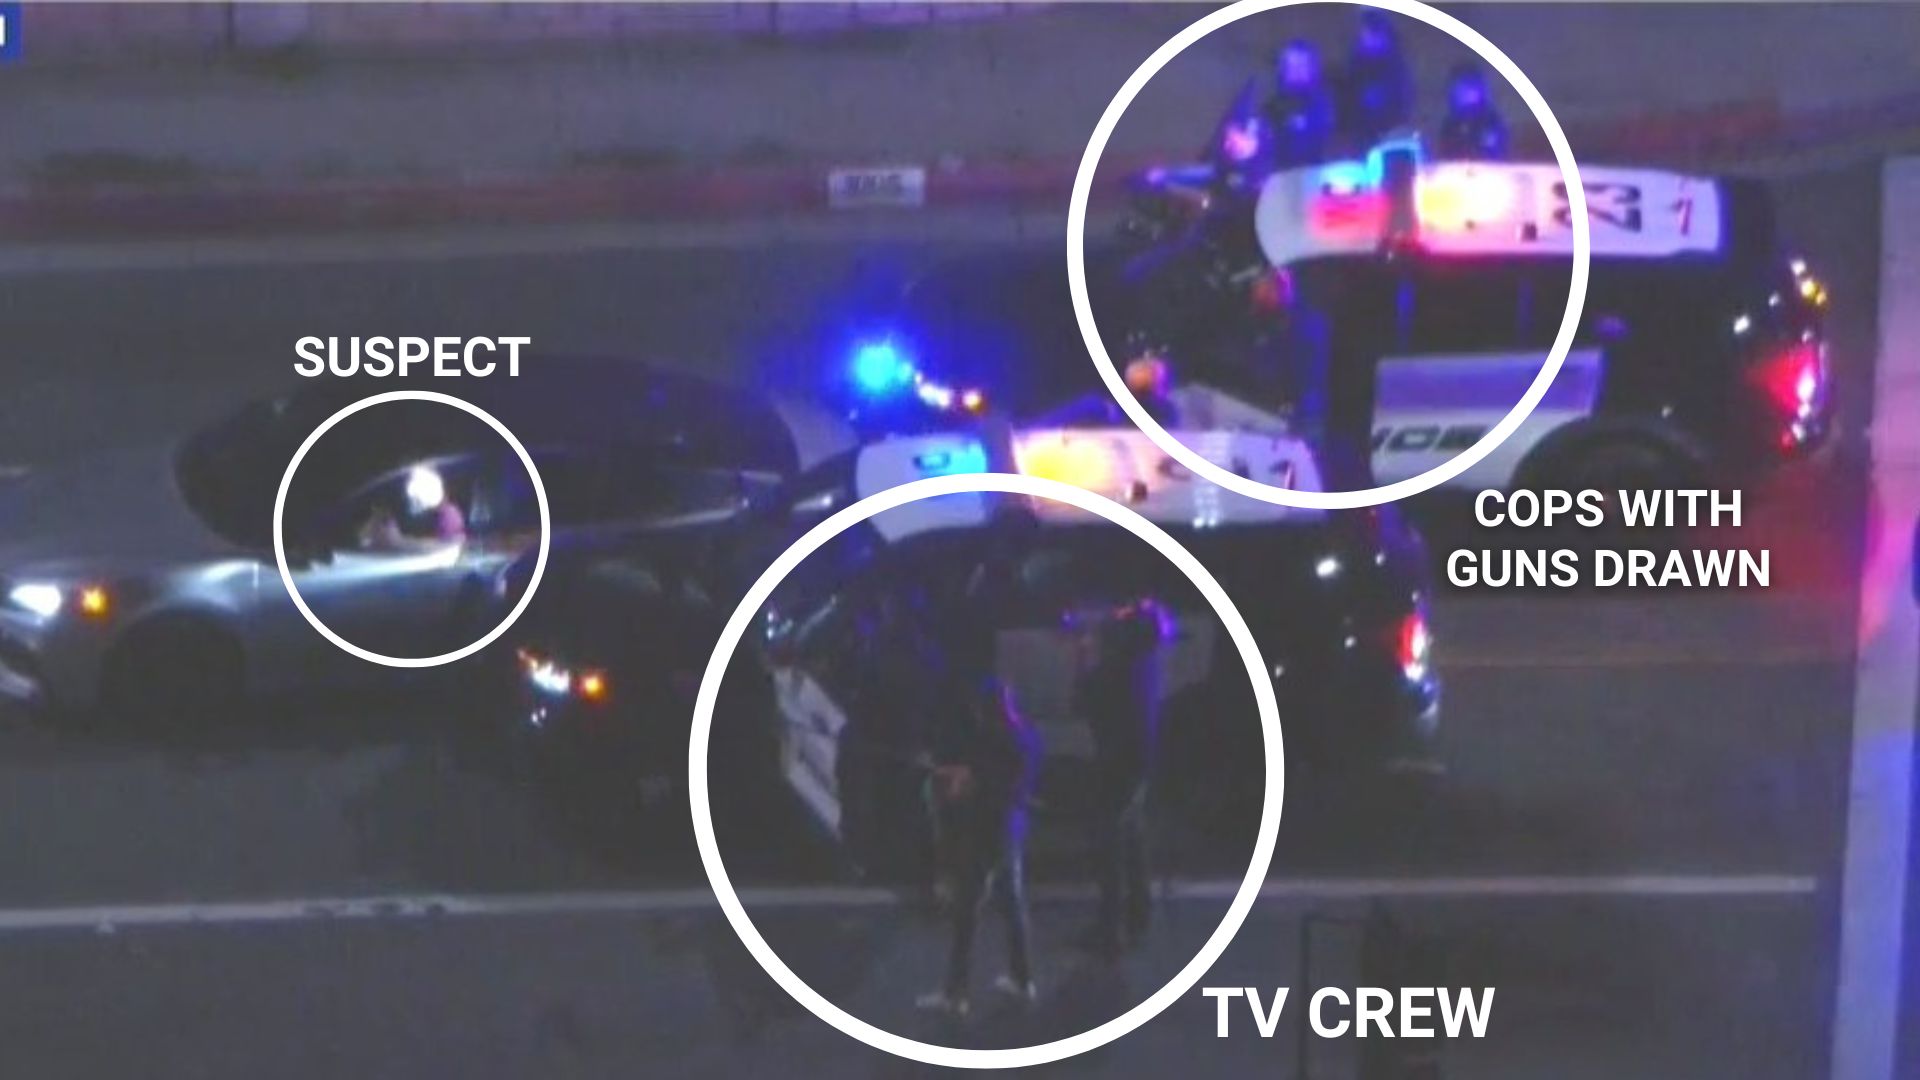 Guns drawns, cameras out in police chase